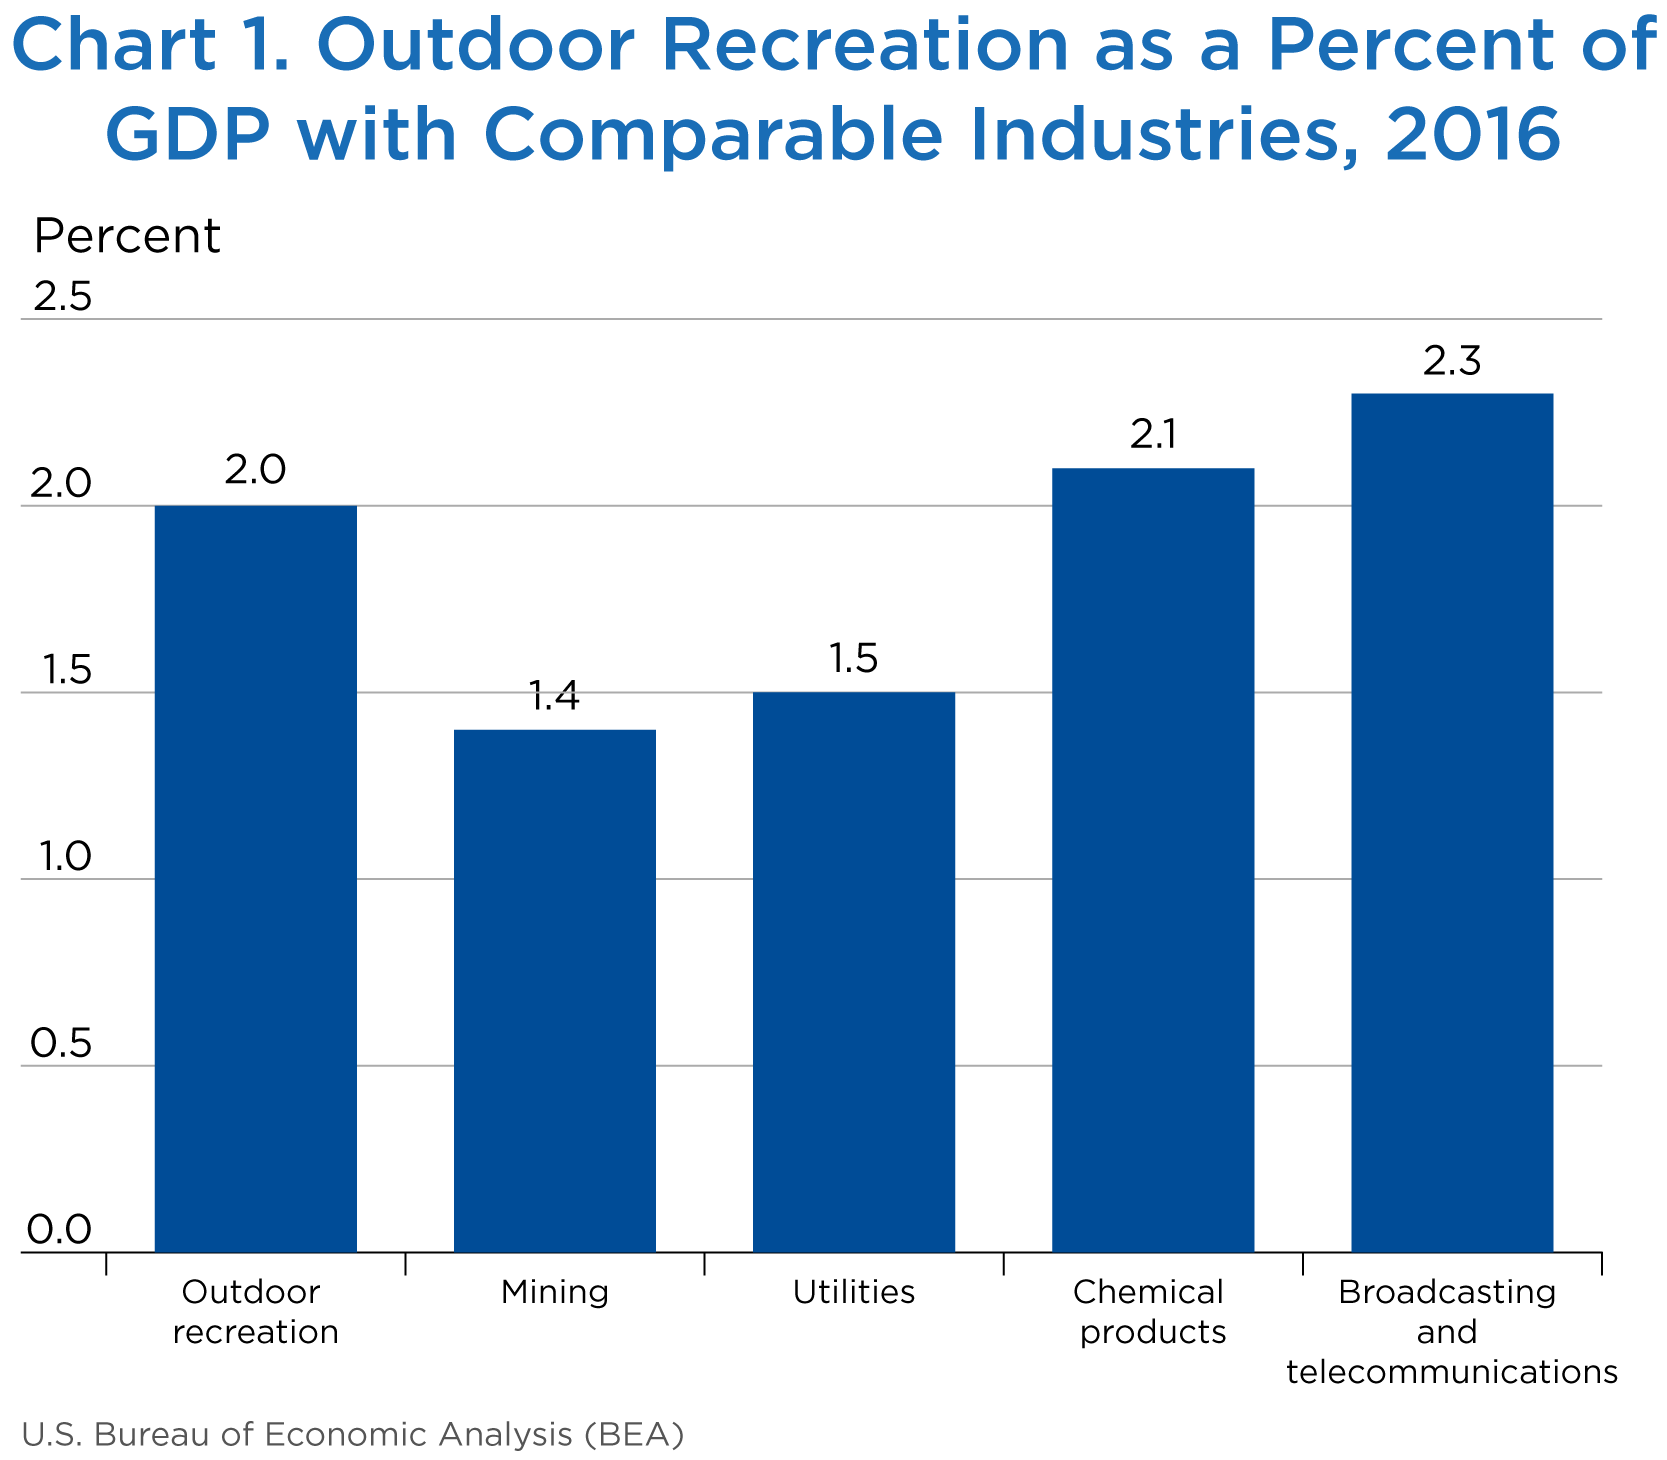 Chart 1. Outdoor Recreation as a Percent of GDP with Comparable Industries, 2016, Bar Chart